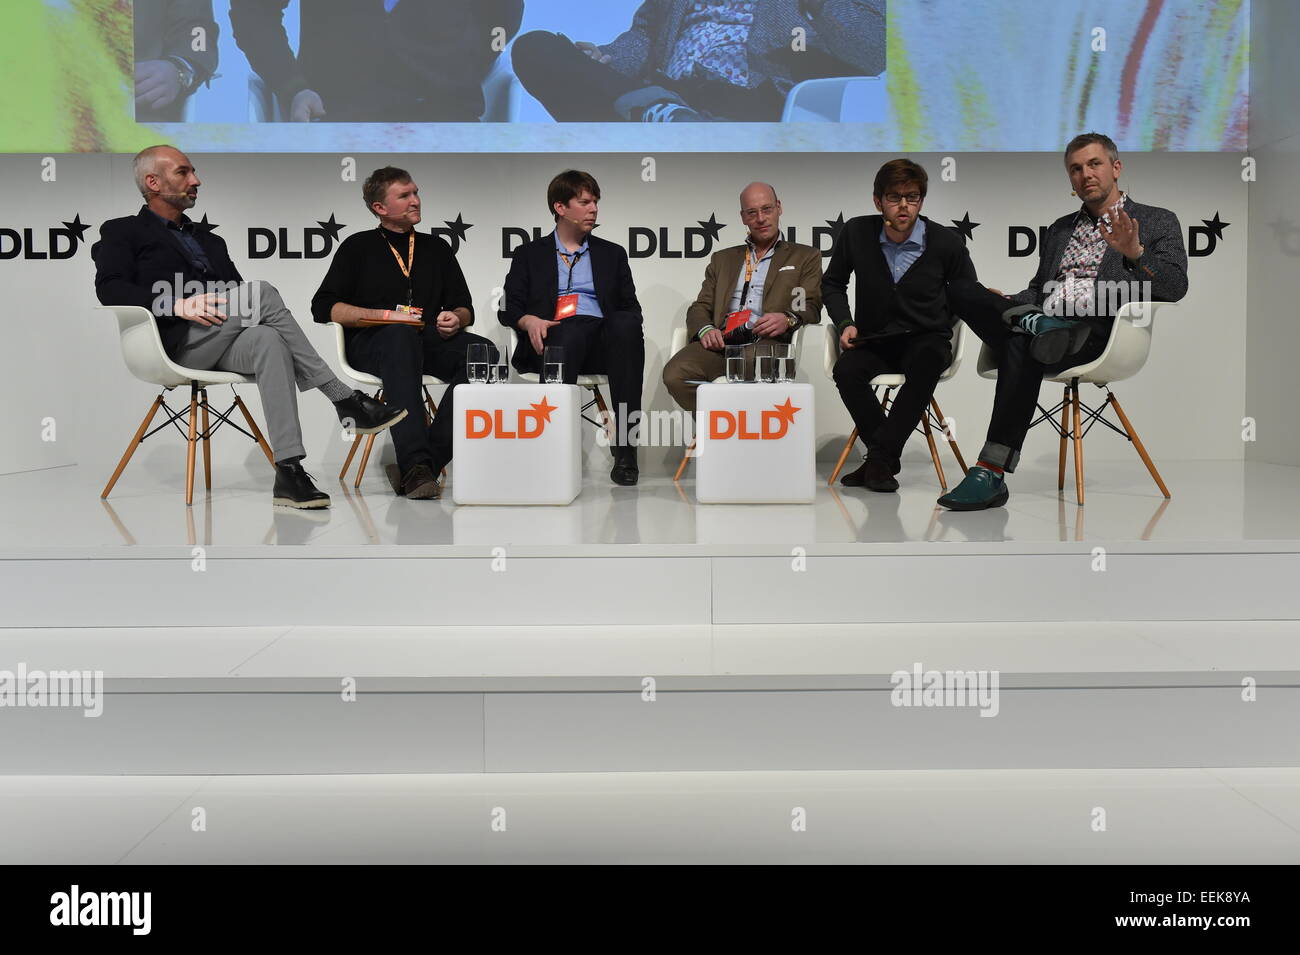 MUNICH/GERMANY - JANUARY 19: Gadi Amit (New Deal Design), Brady Forrest (PCH), Nial Murphy (Evrything), Roman Friedrich (Strategy&), Lars Hinrichs (Cinco Capital) sit togethert on the podium during the DLD15 (Digital-Life-Design) Conference at the HVB Forum on January 19, 2015 in Munich, Germany. DLD is a global network of innovation, digitization, science and culture, which connects business, creative and social leaders, opinion formers and influencers for crossover conversation and inspiration.(Photo: picture alliance / Kai-Uwe Wärner)(Photo: picture alliance / Kai-Uwe Wärner)/picture allian Stock Photo